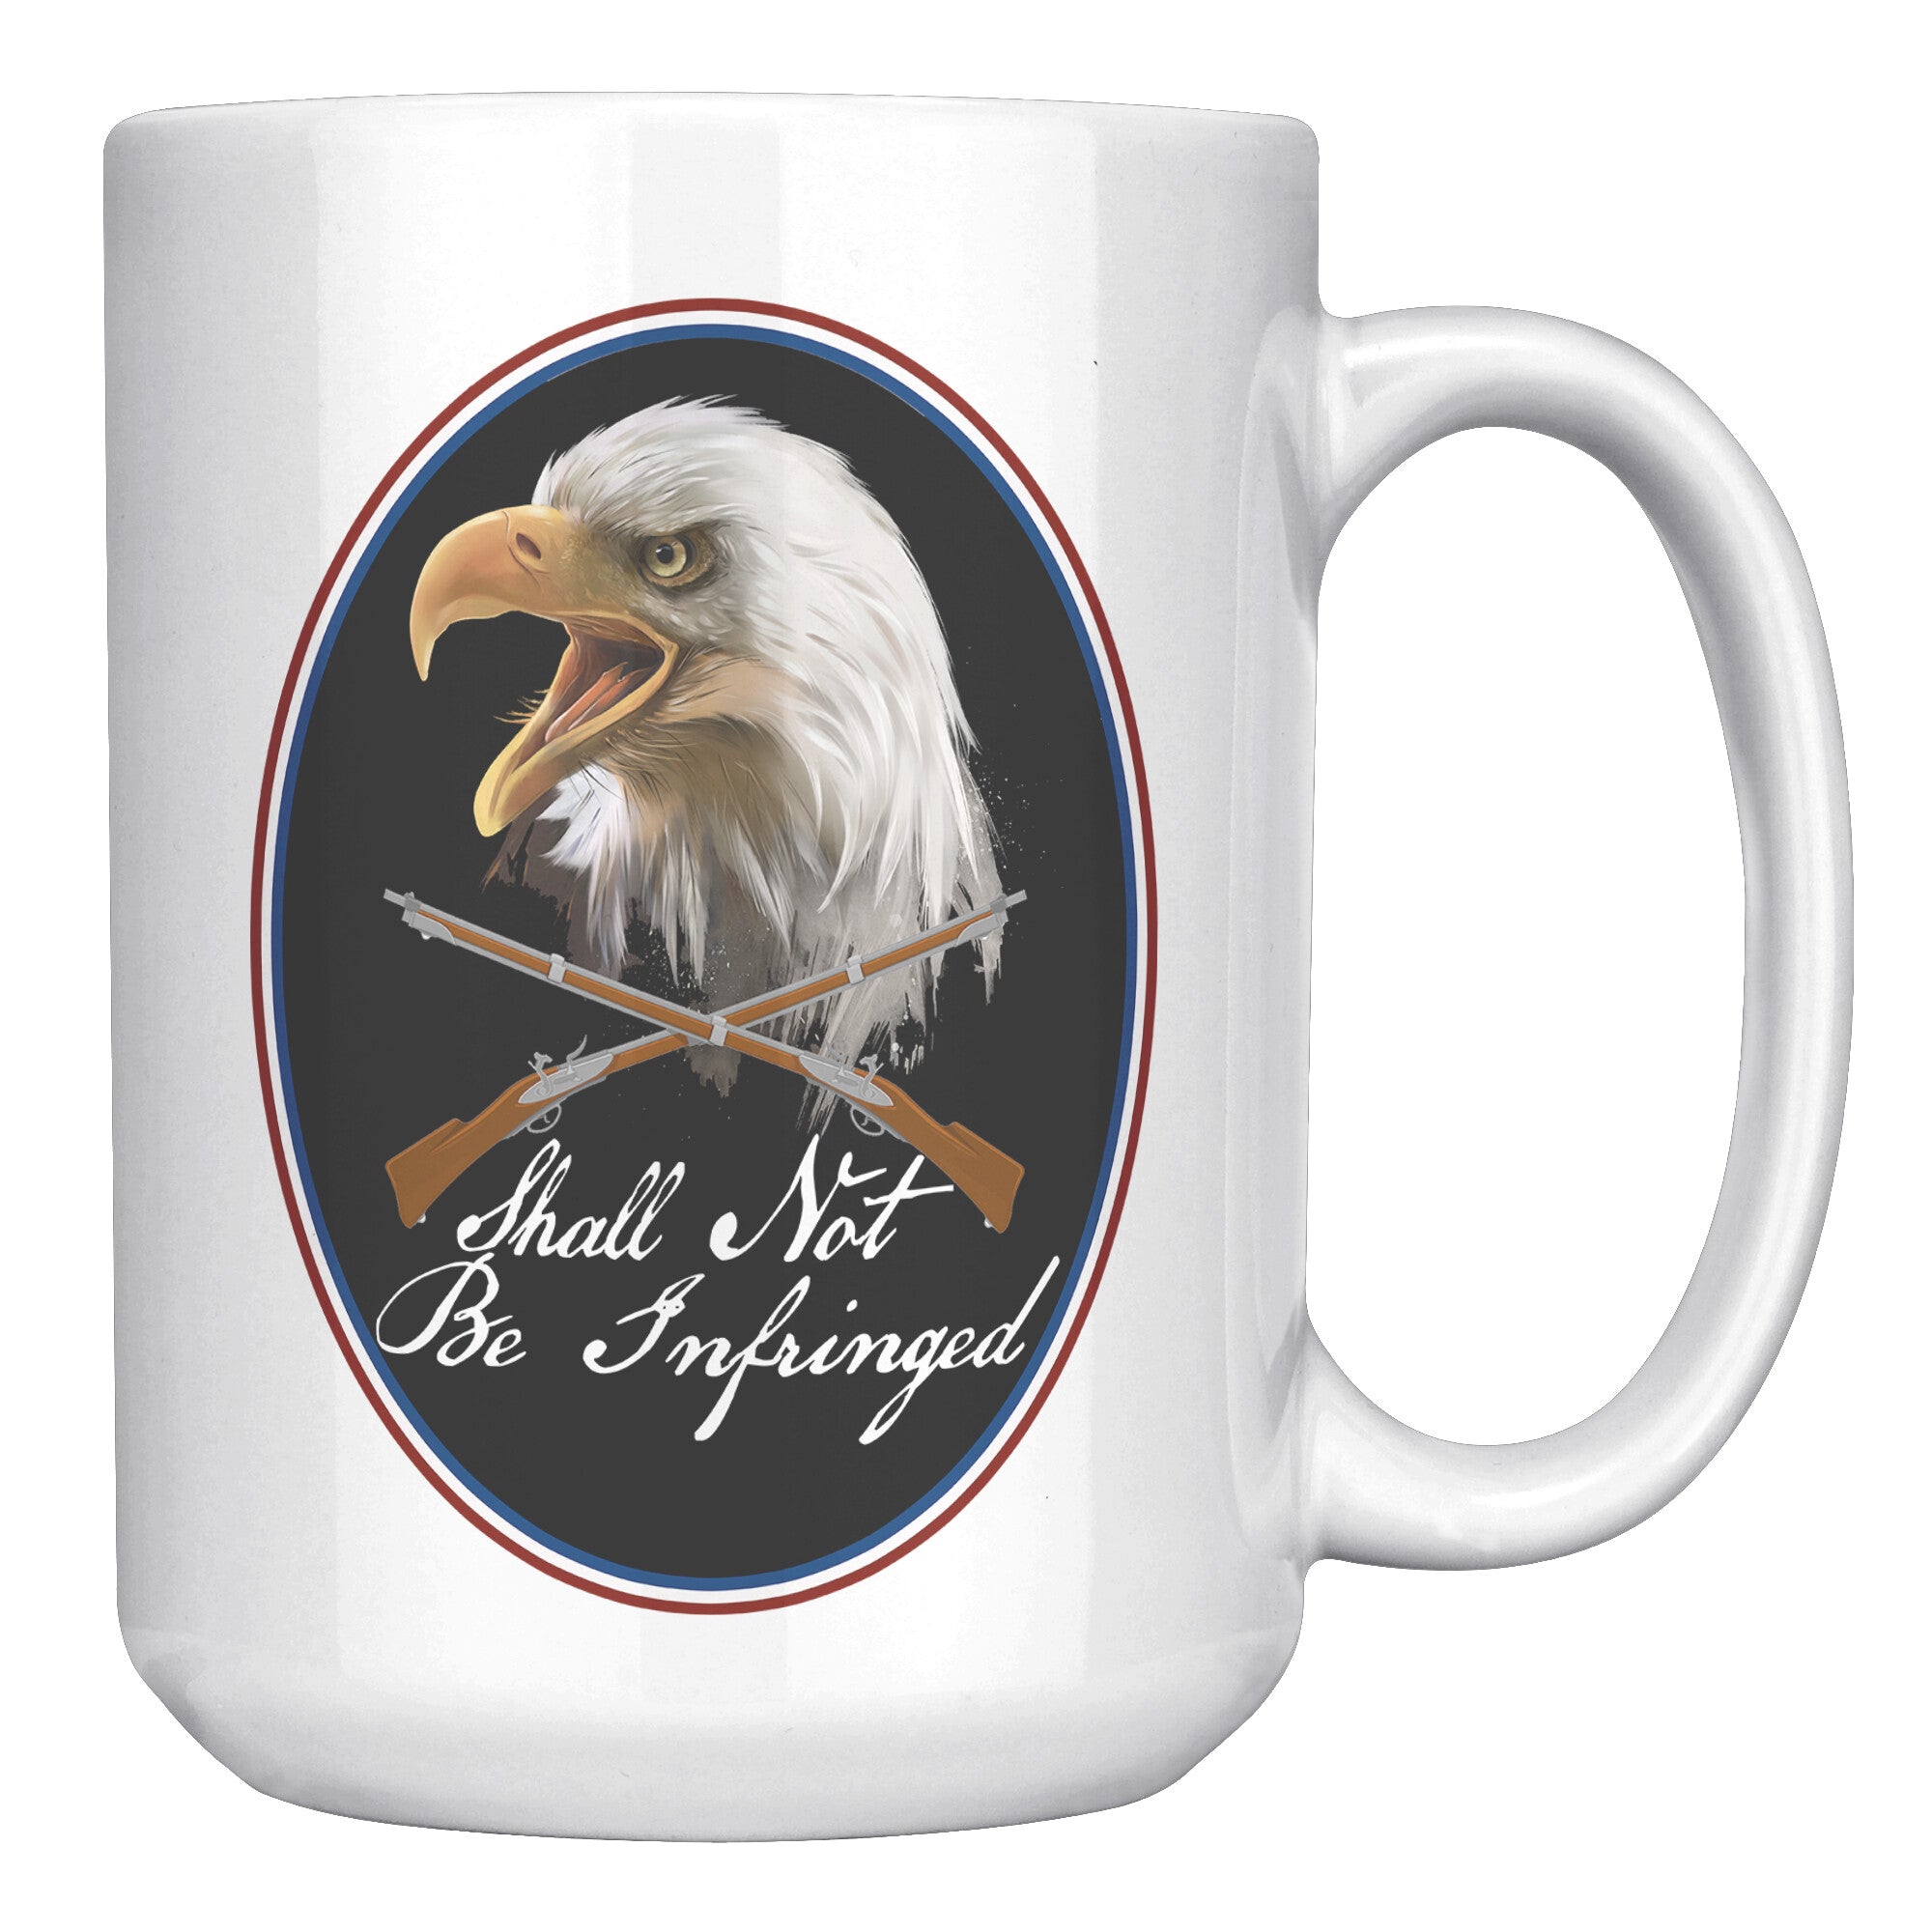 EAGLE #1  -SHALL NOT BE INFRINGED